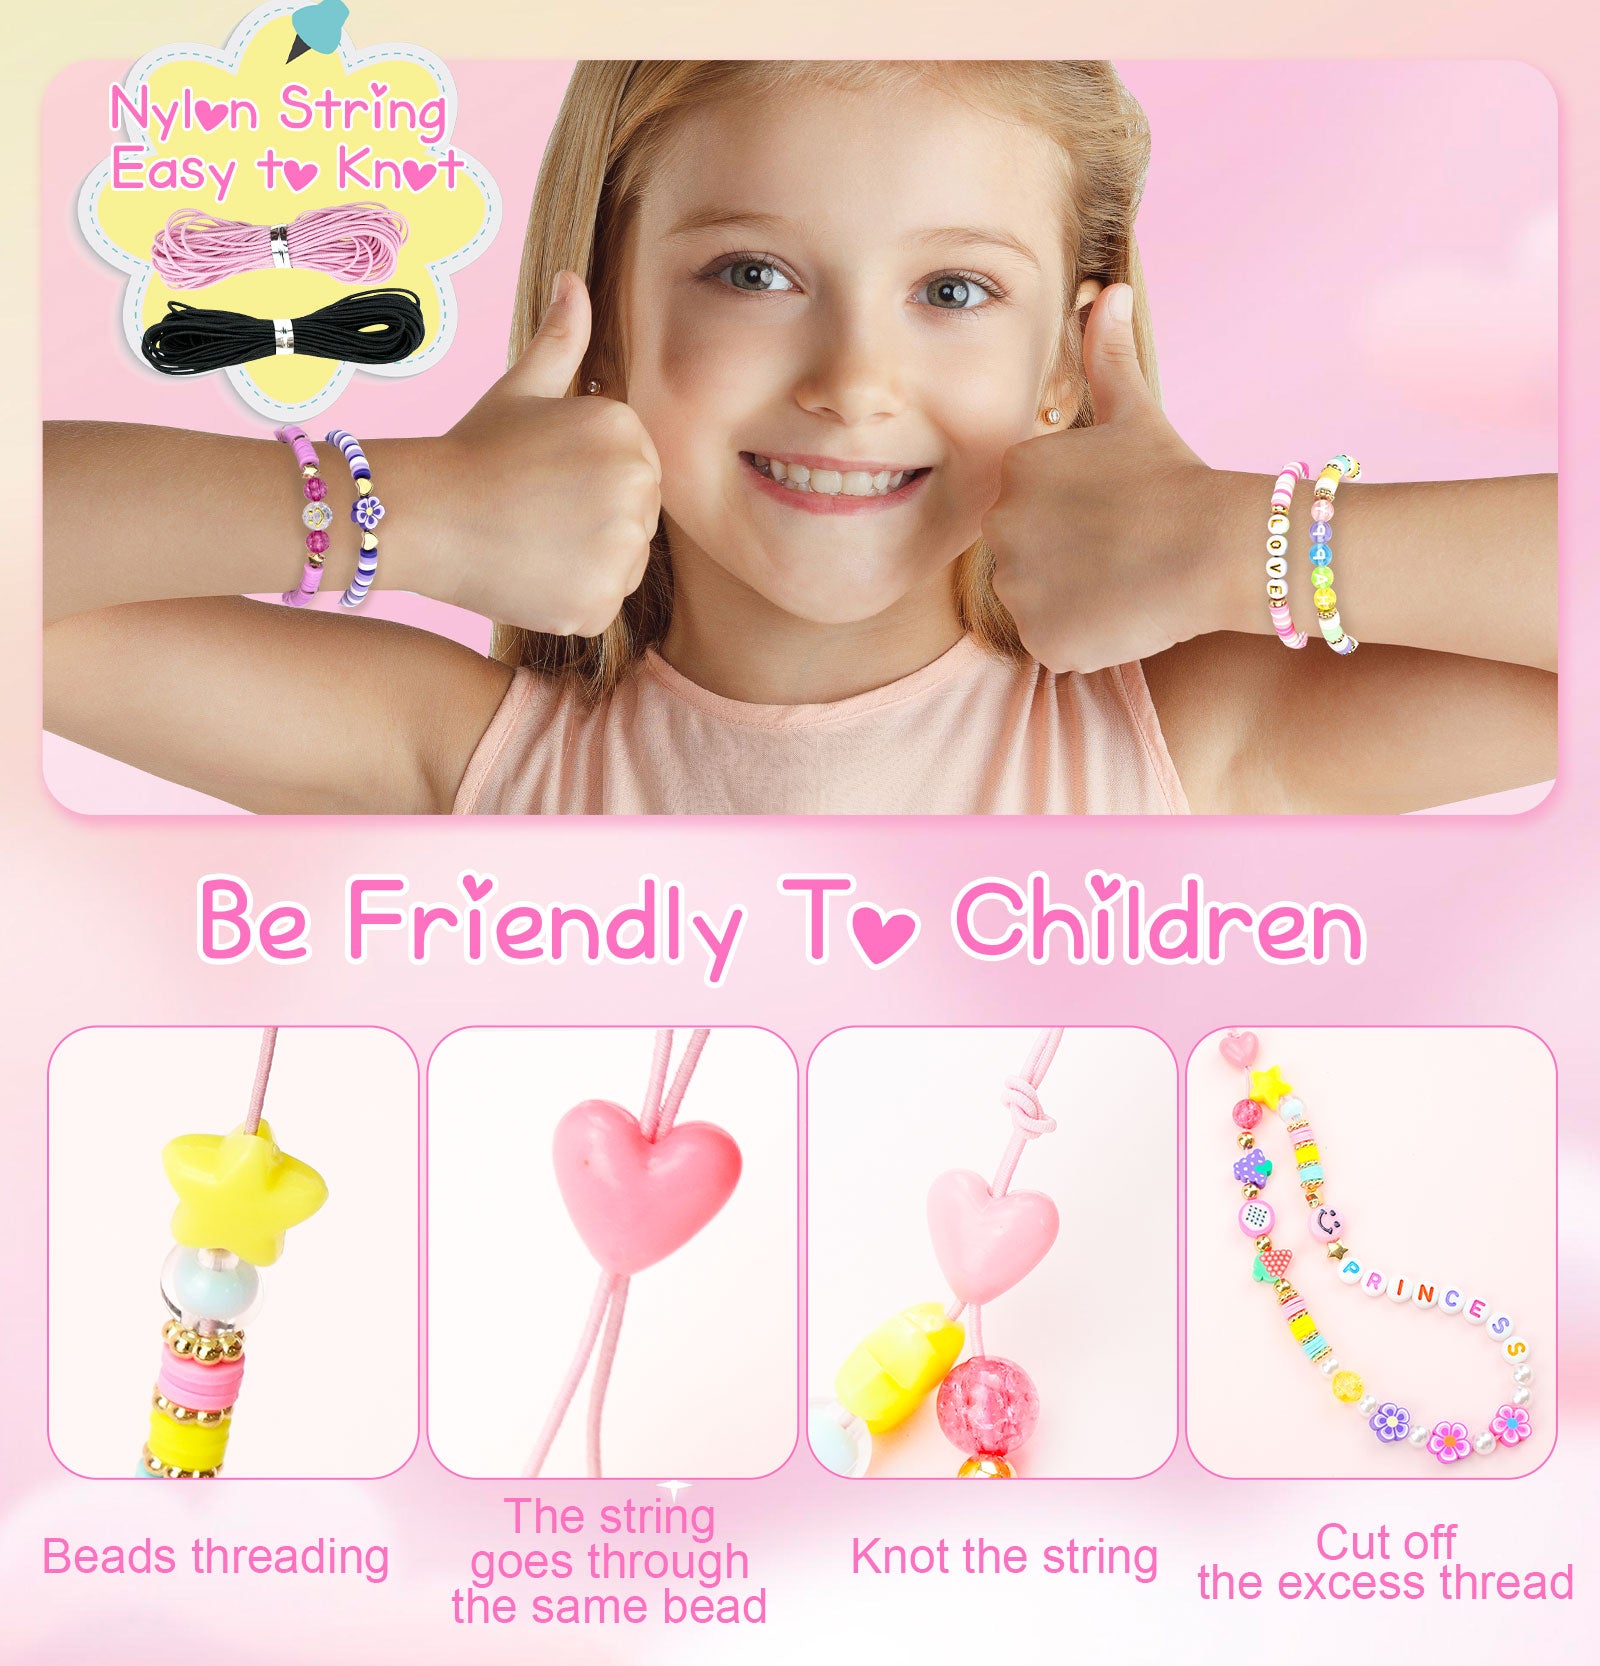 12 Styles Friendship Bracelet Kit With String And Letter Beads